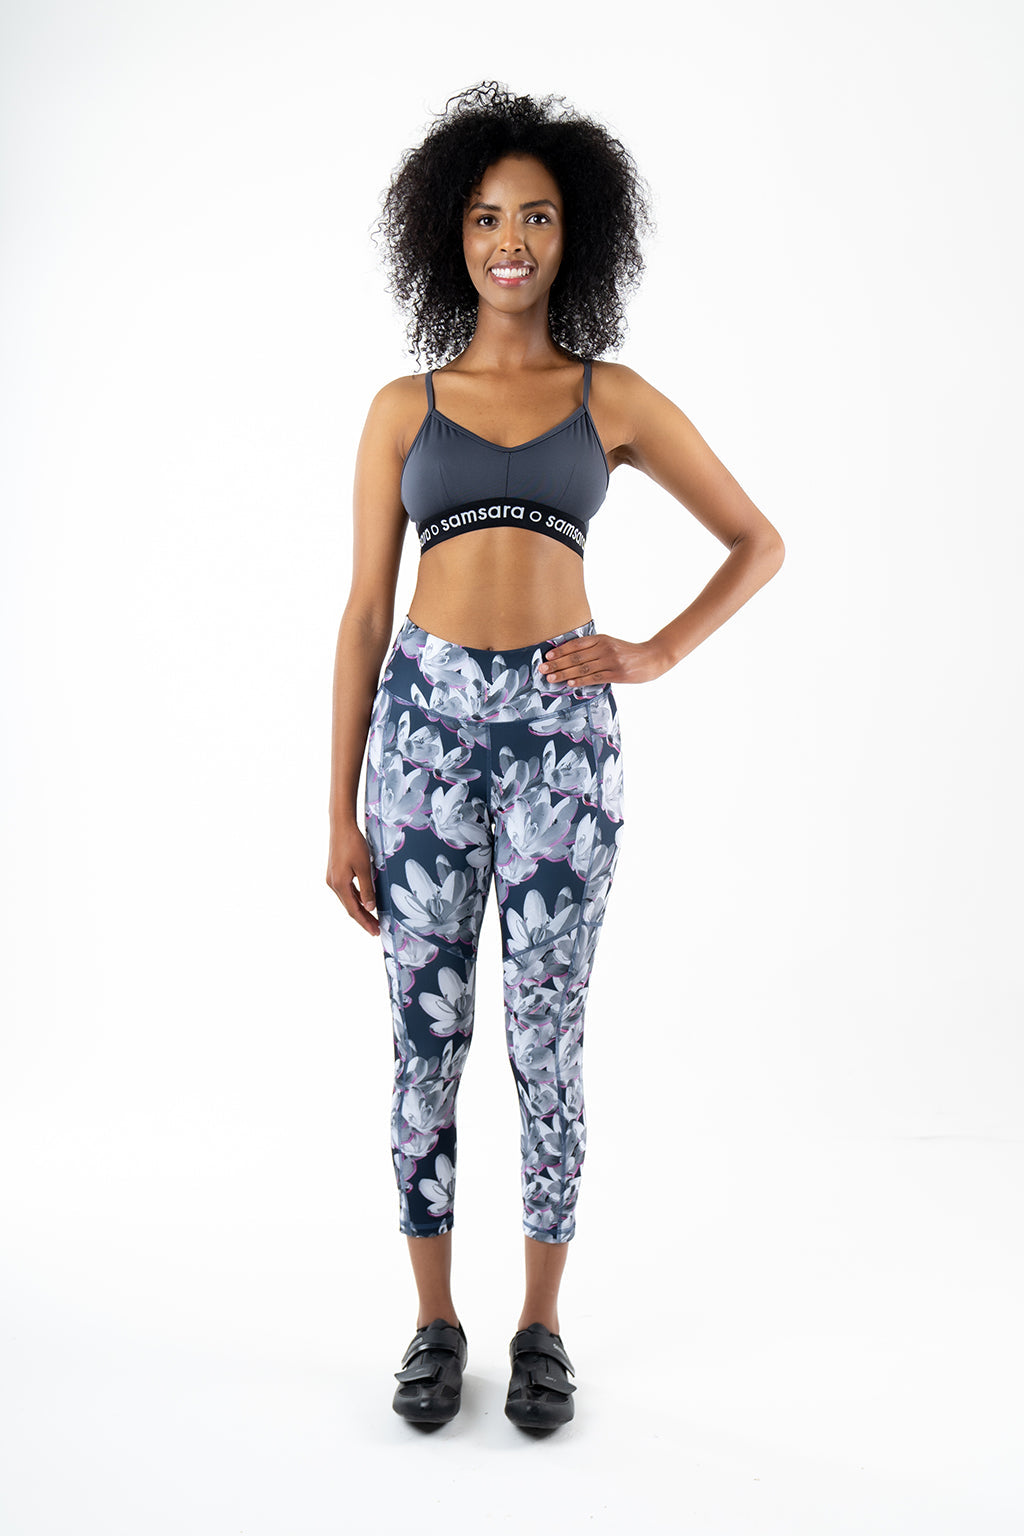 Padded Cycling Tights - Made for Women, Mesh Panels, Navy Floral